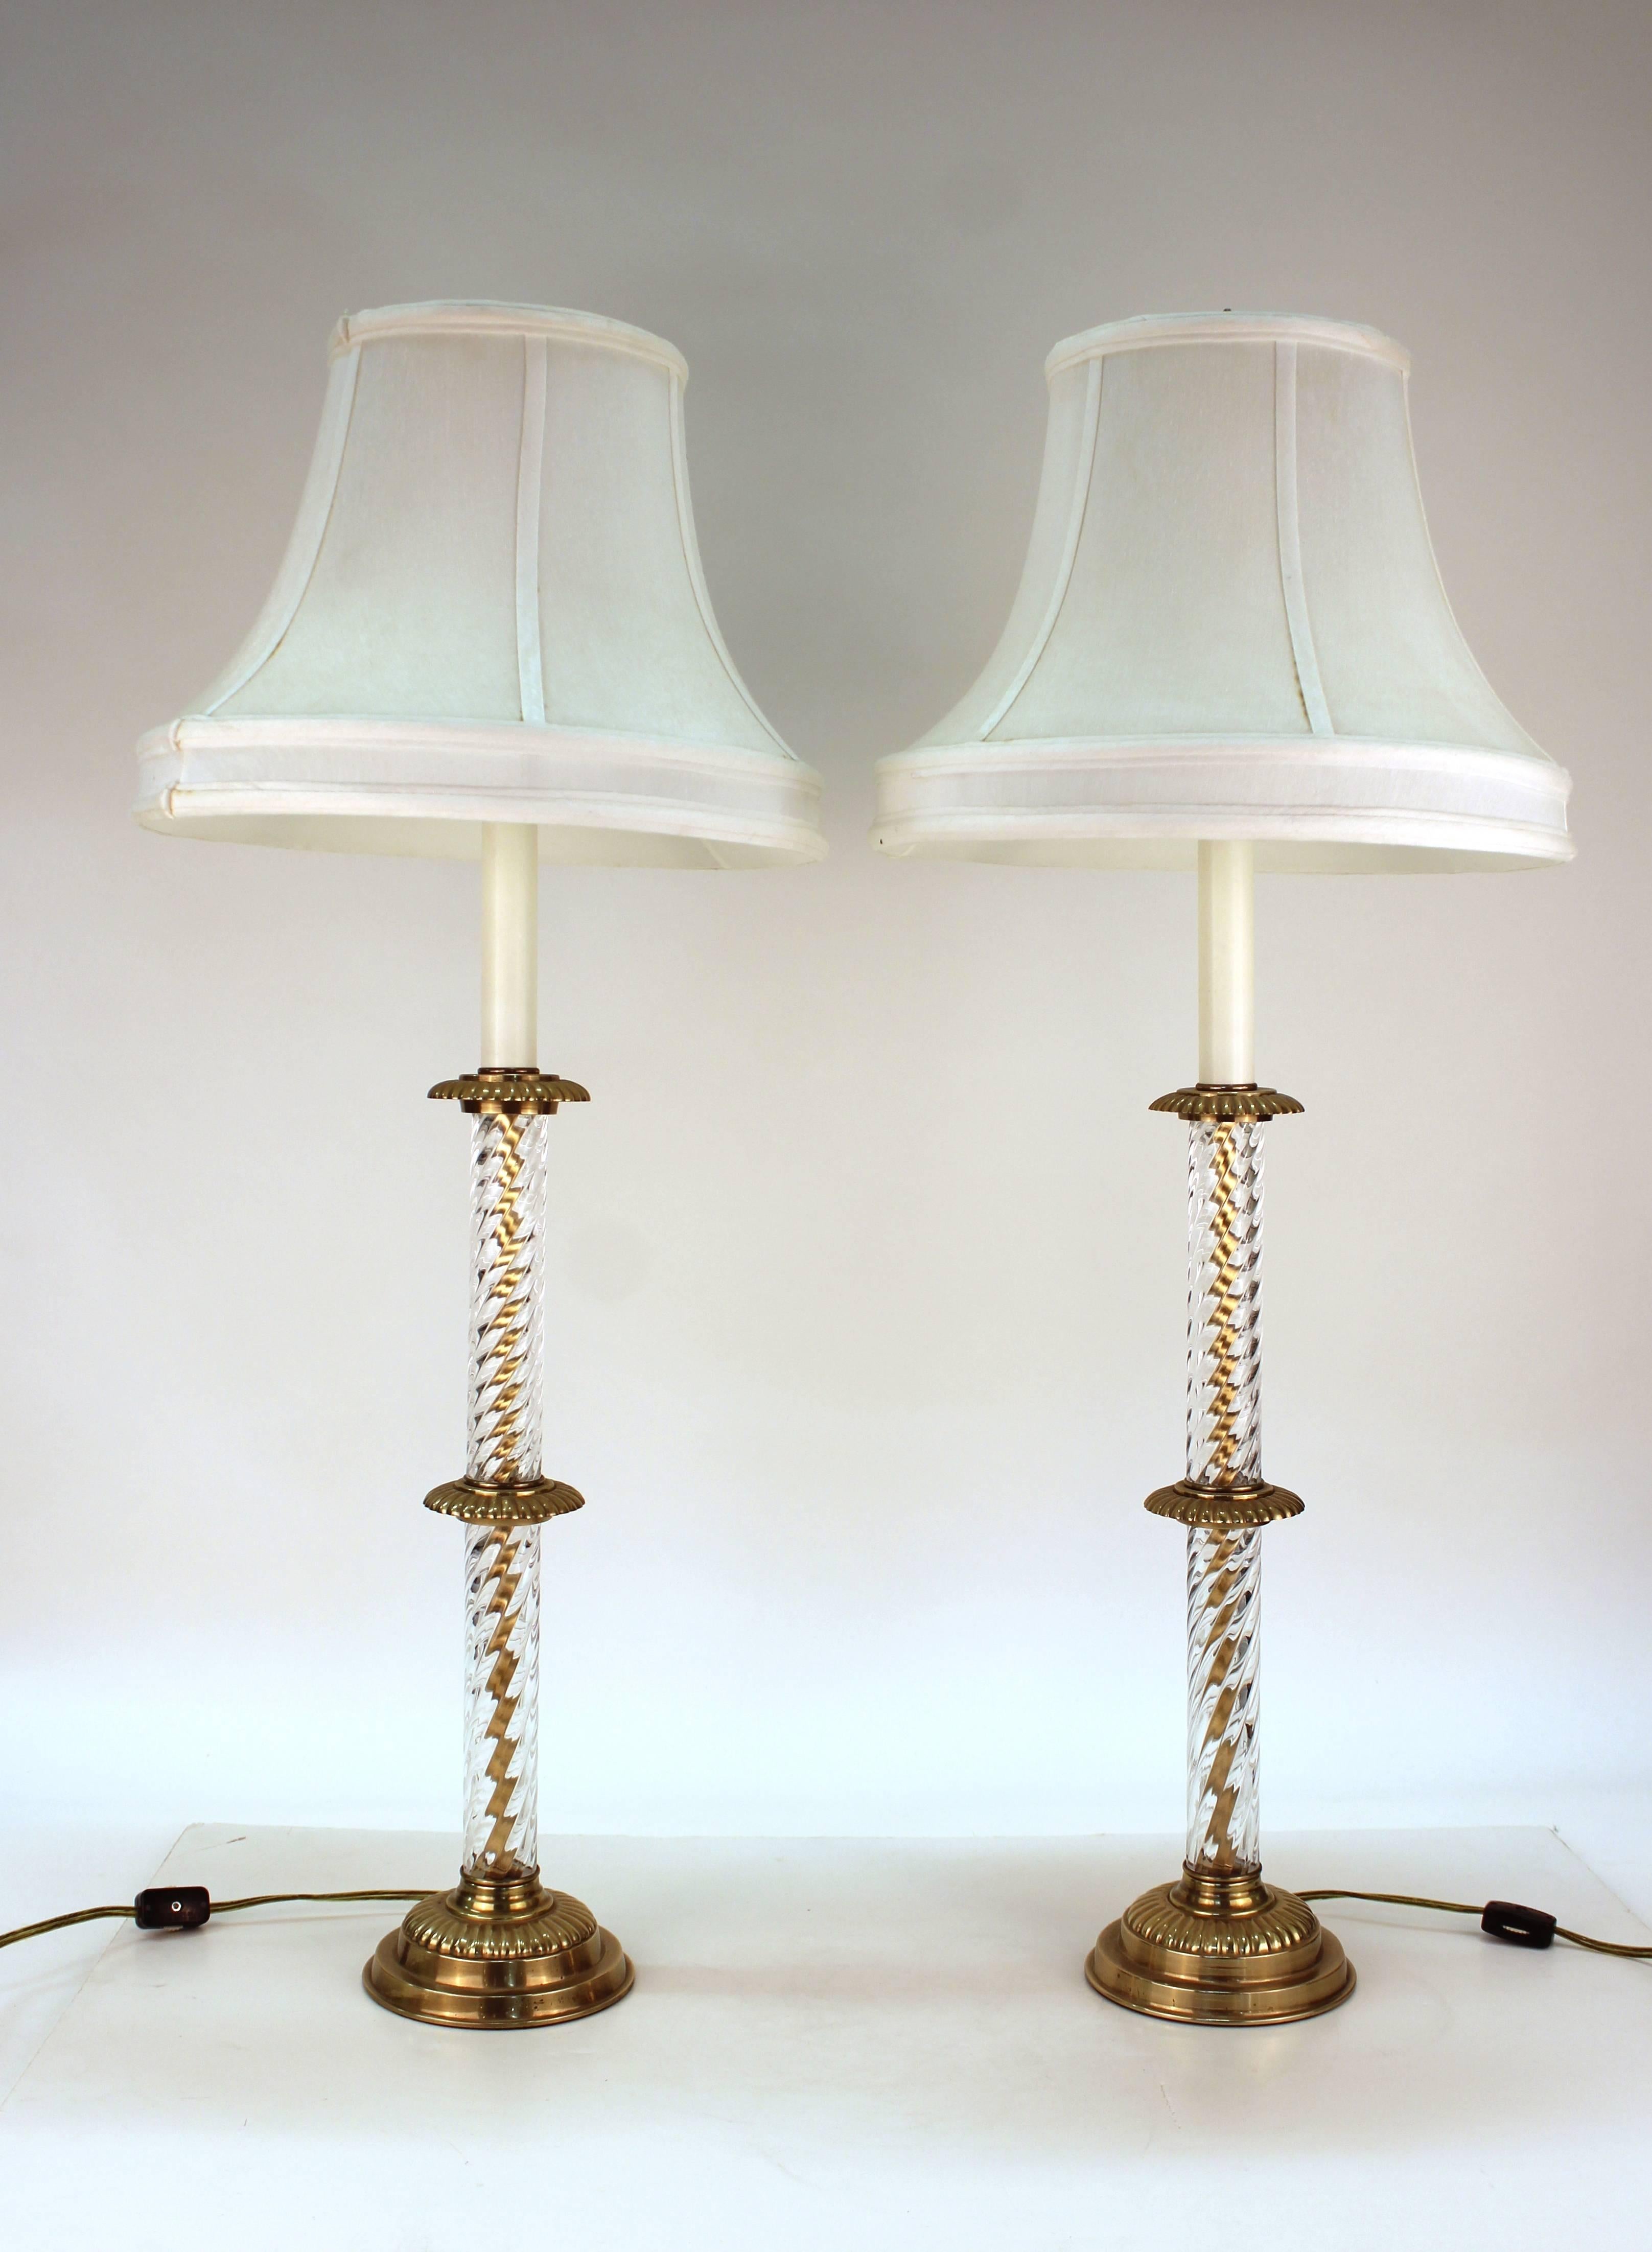 Frederick Cooper lamps with column motif dating from the 1970s. Crafted in cut crystal with twisting rope motif and intersecting brass plates. The pair also feature bevelled brass basses and white shades. Minor wear to the brass on the bases but in